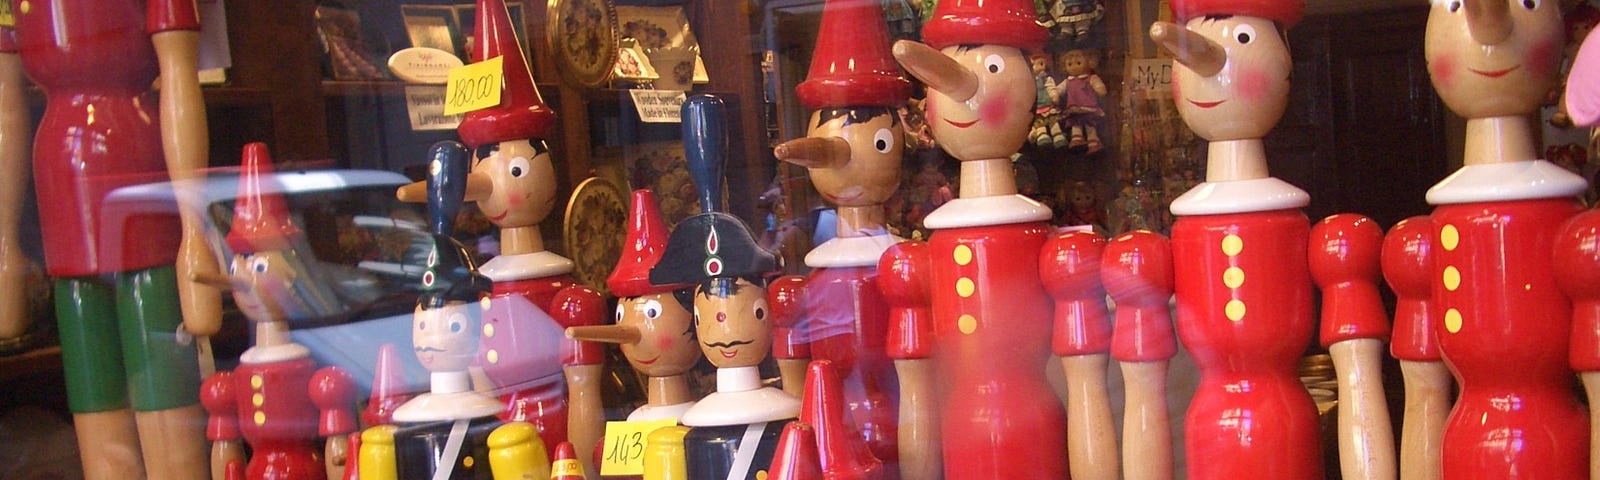 A shop in Florence, Italy, with multiple Pinochio puppets of various sizes, and some other dolls.